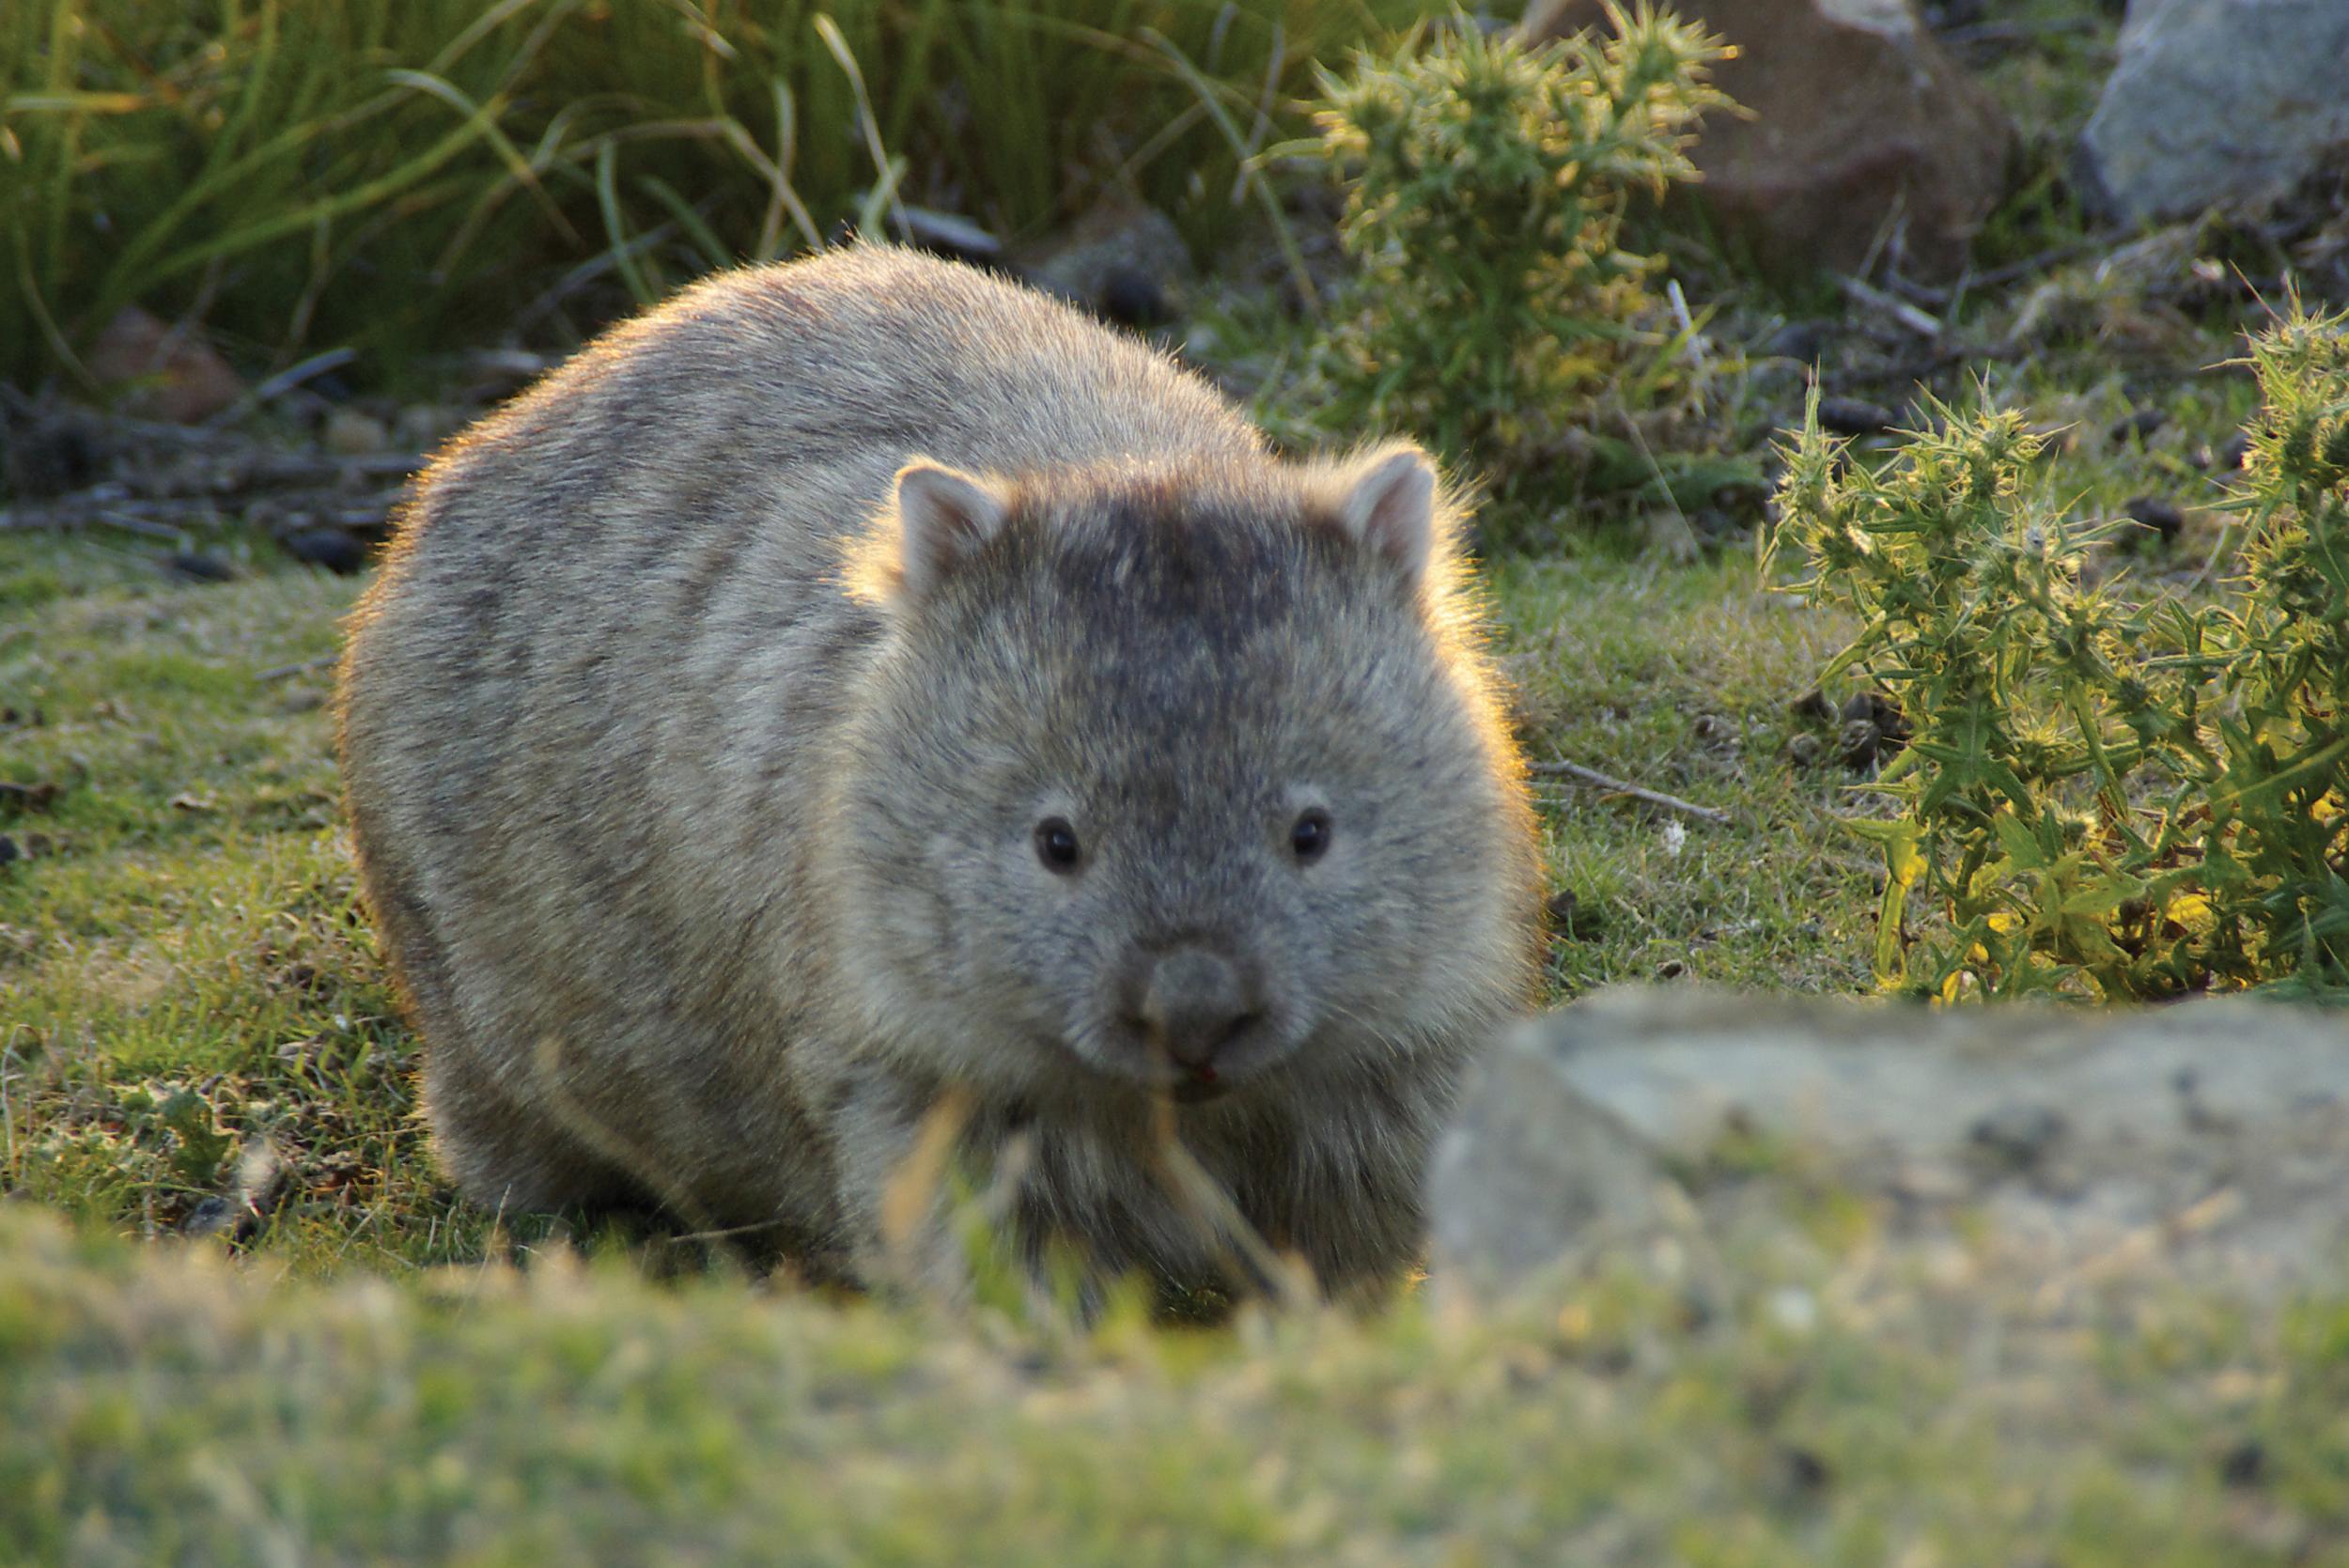 Maria Island is one of the best places to observe wombats in Australia